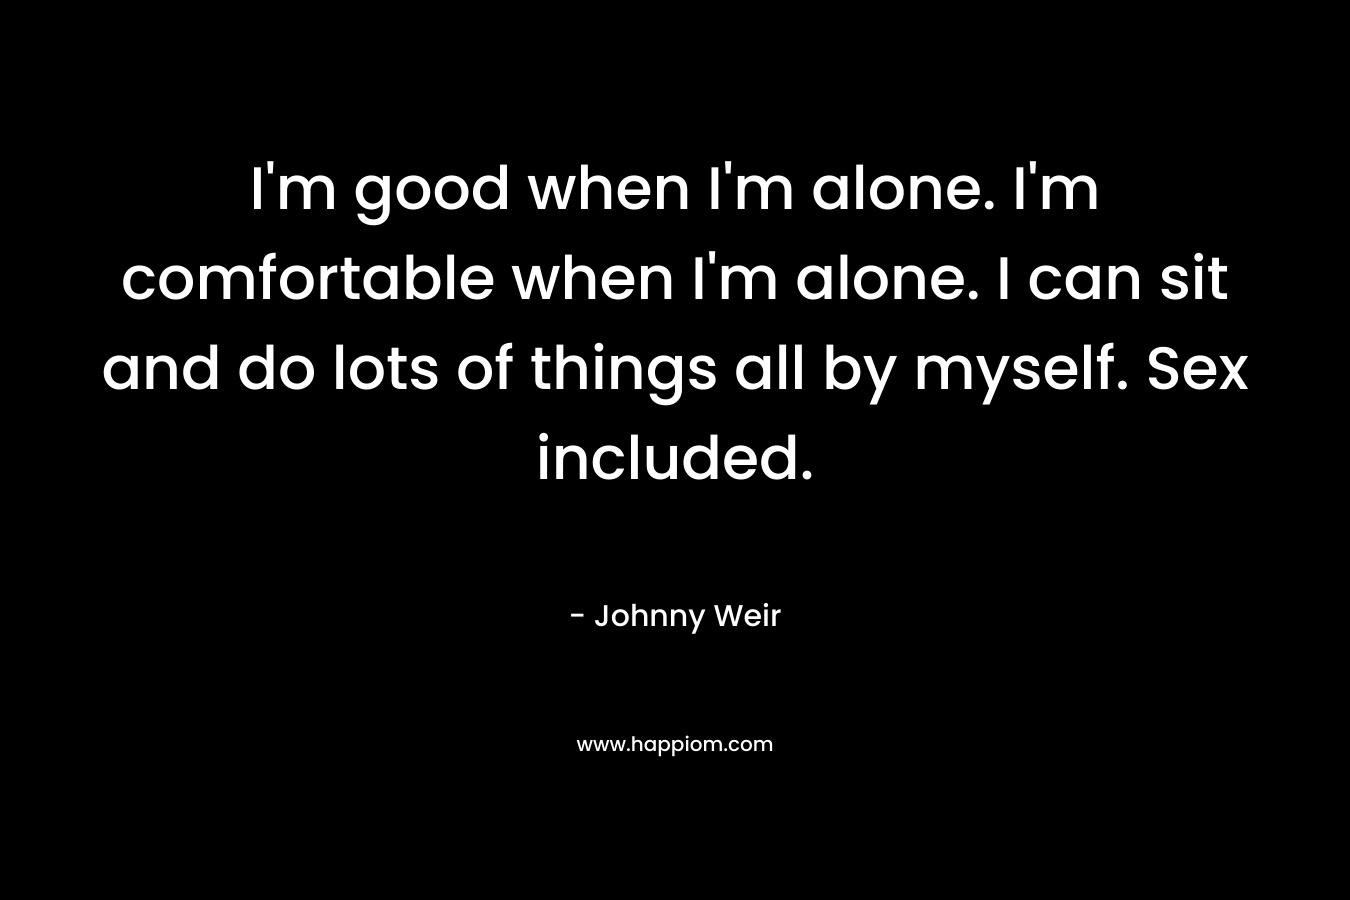 I’m good when I’m alone. I’m comfortable when I’m alone. I can sit and do lots of things all by myself. Sex included. – Johnny Weir